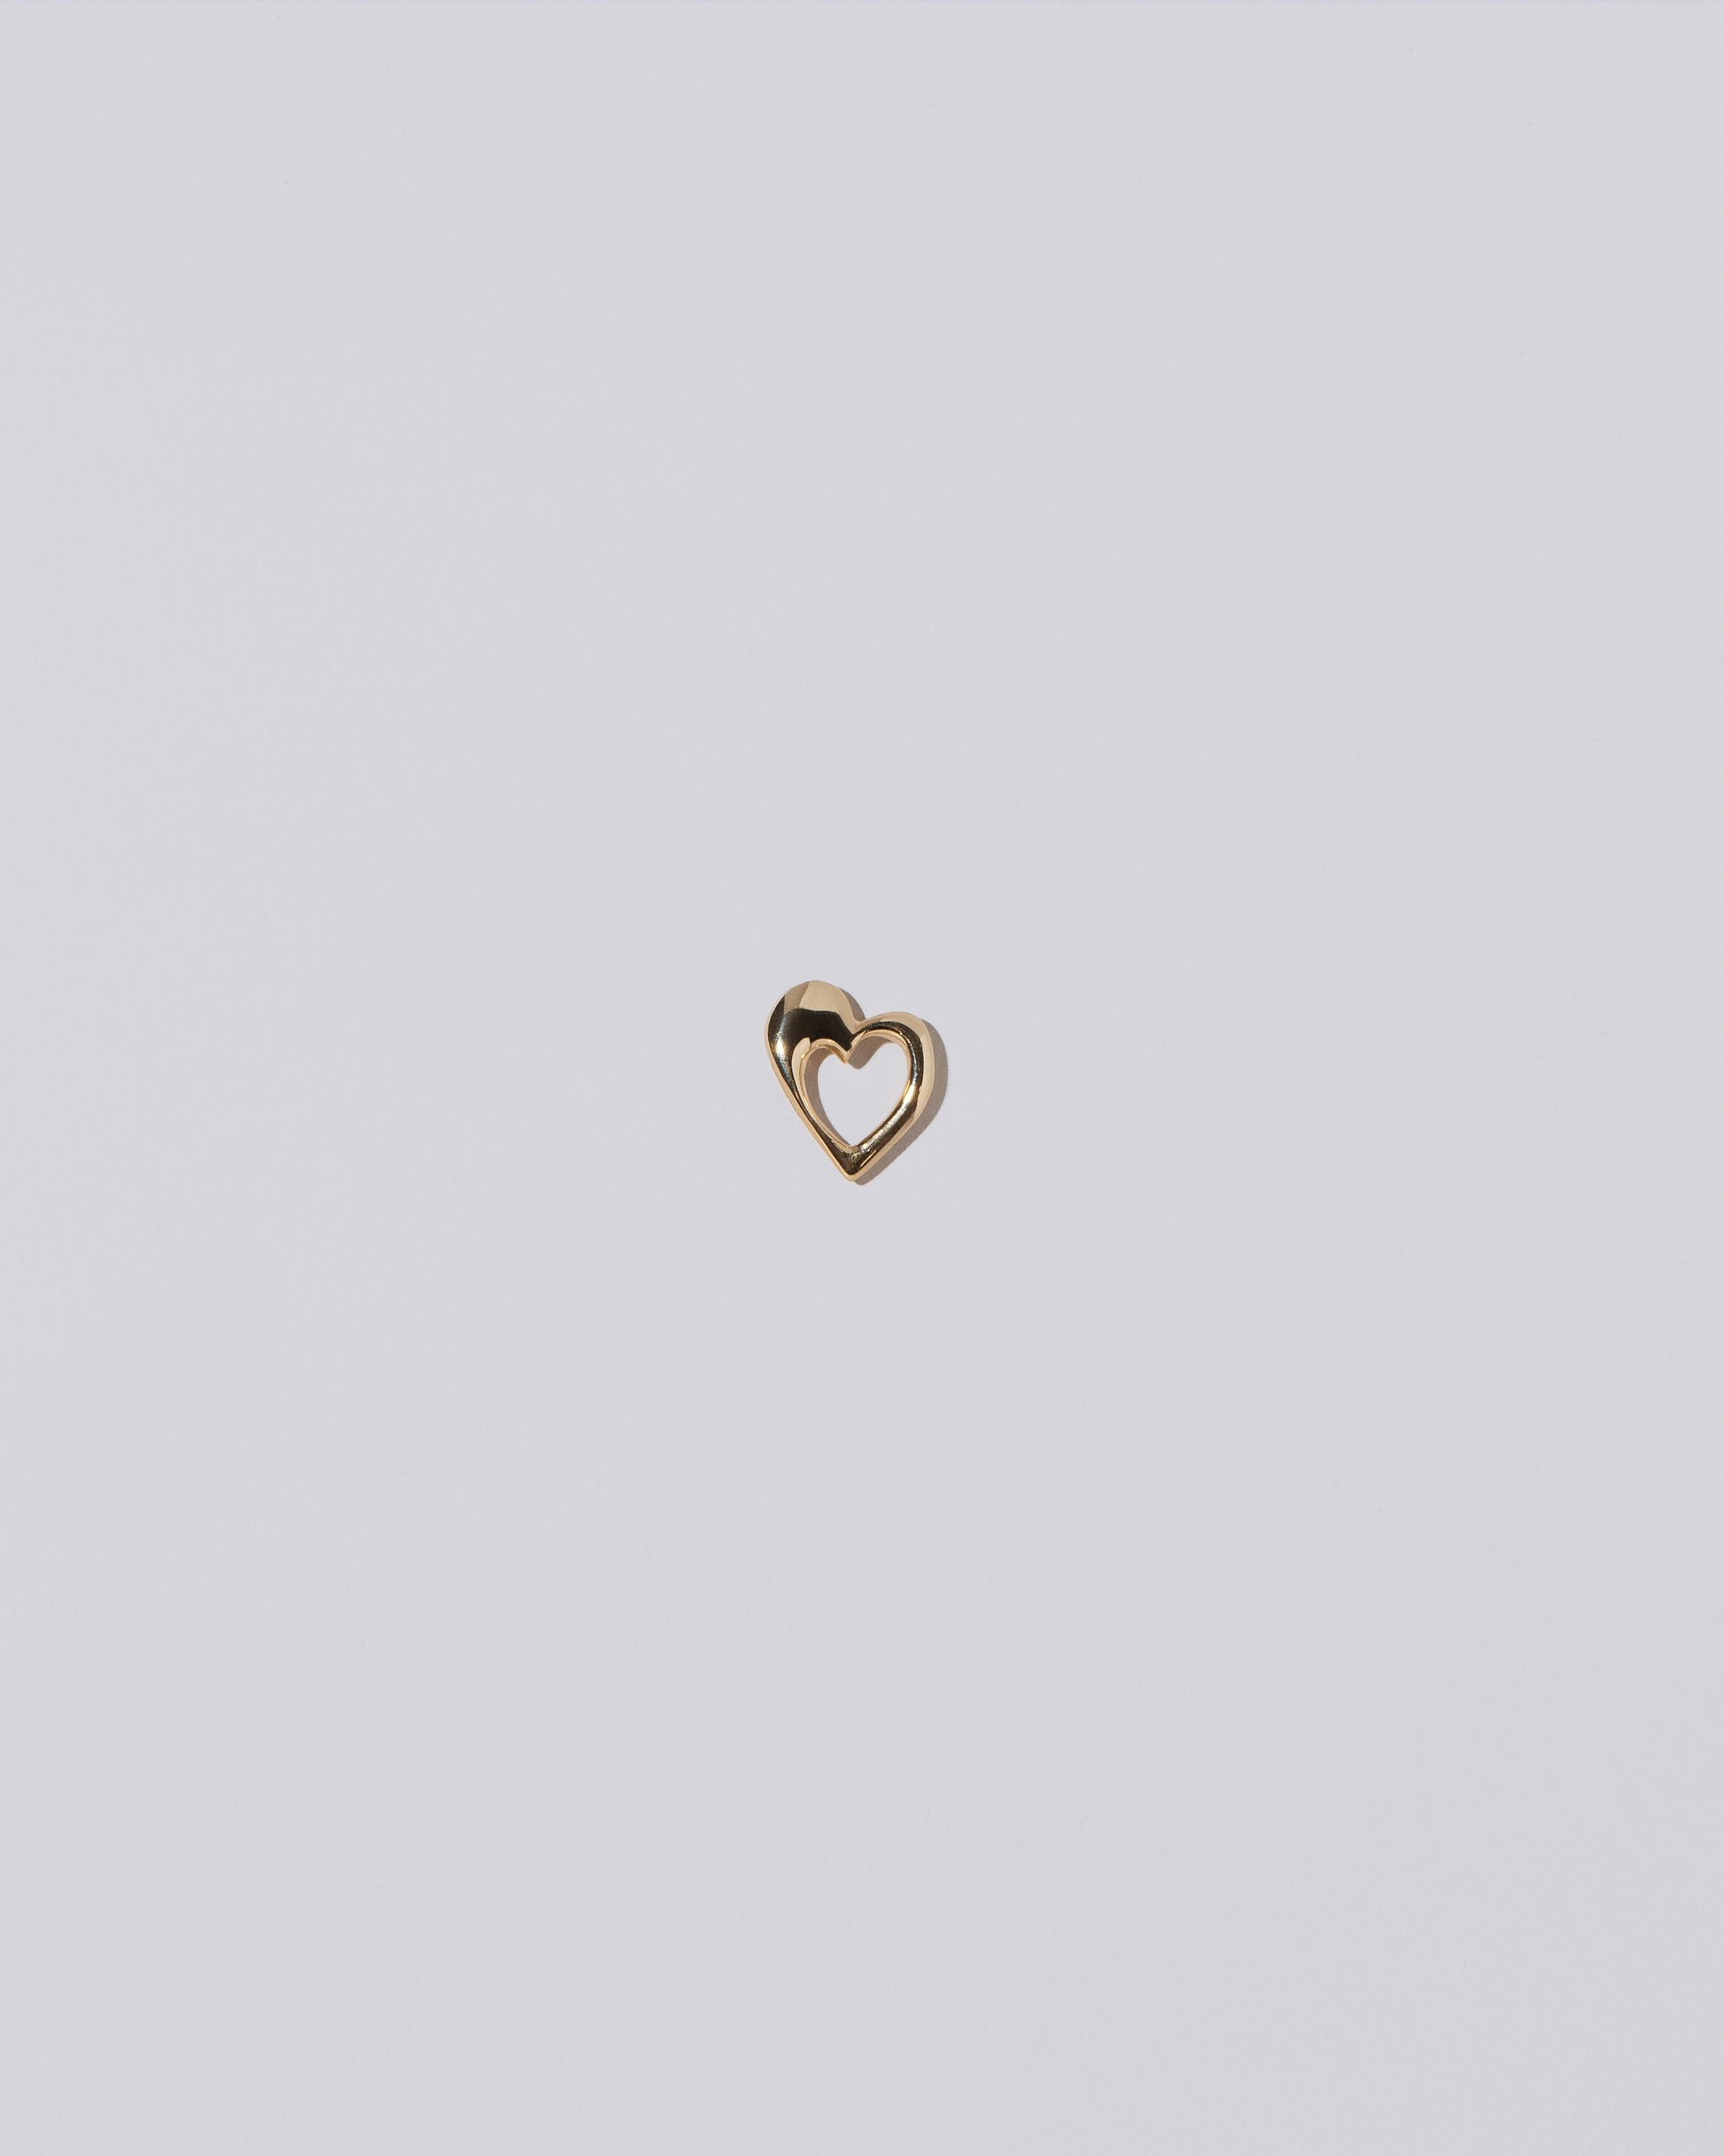 Gold Open Thousand & One Night Heart Charm on light color background.